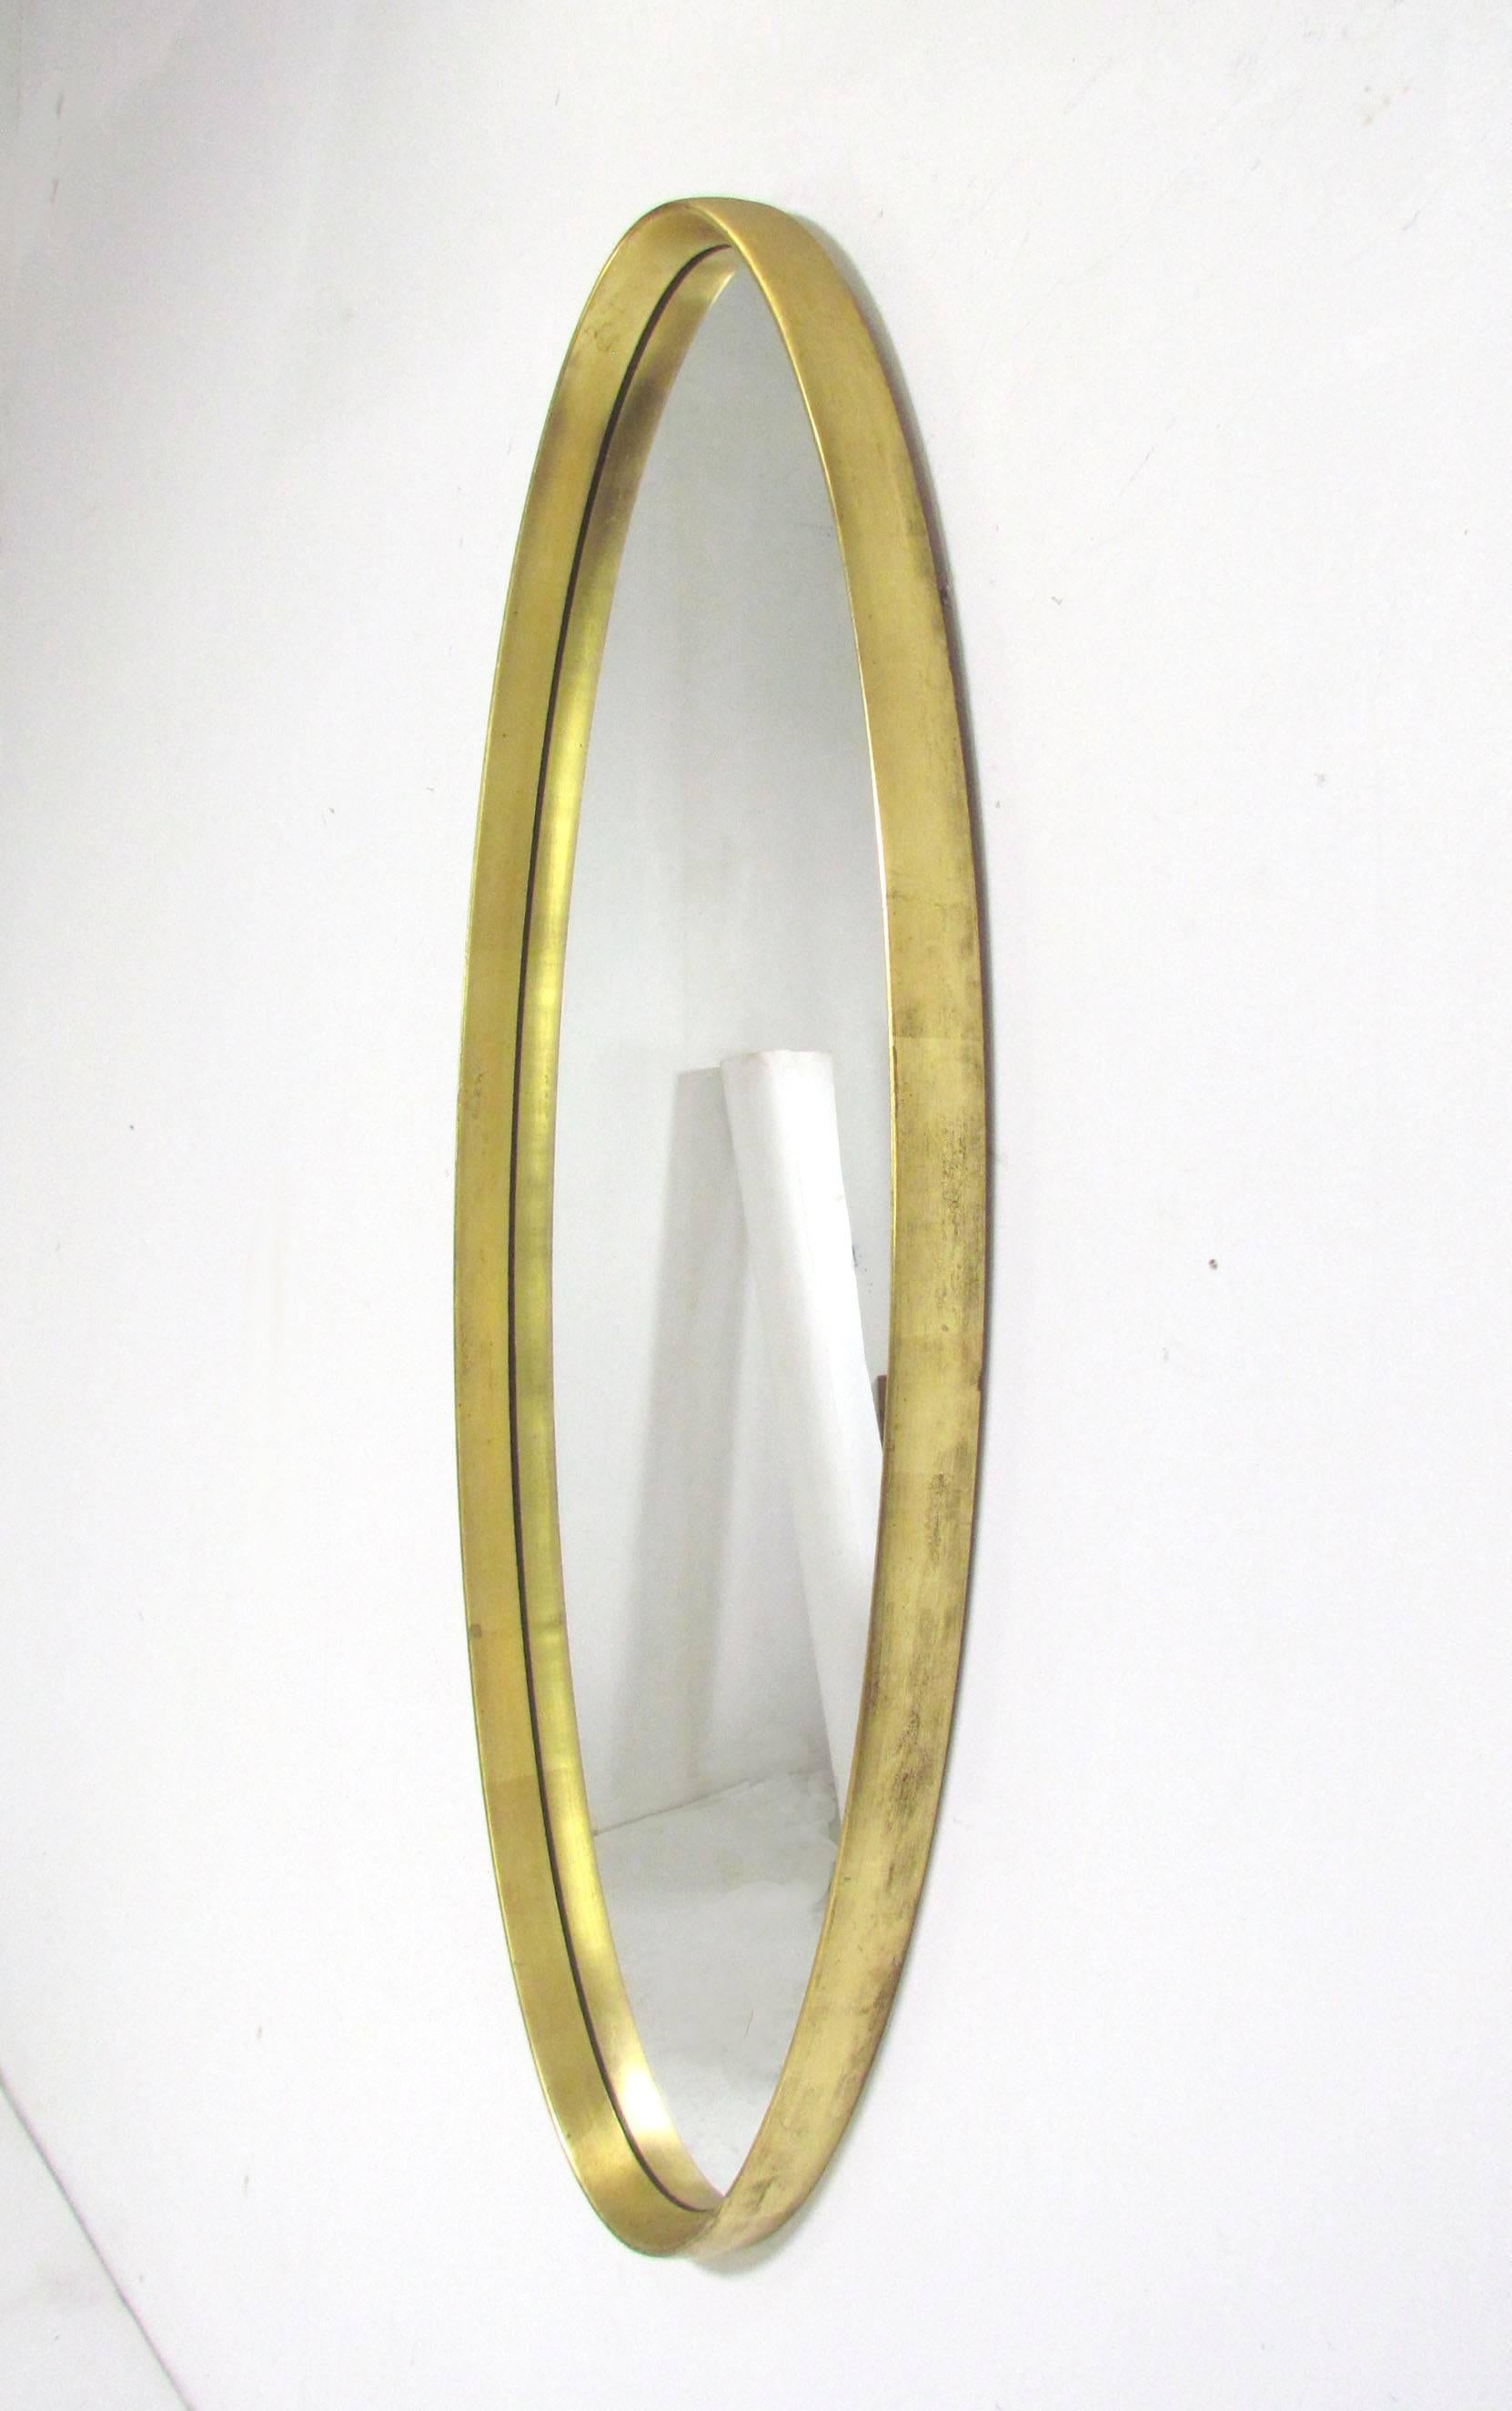 Classic Mid-Century gold leaf oval wall mirror, signed La Barge.